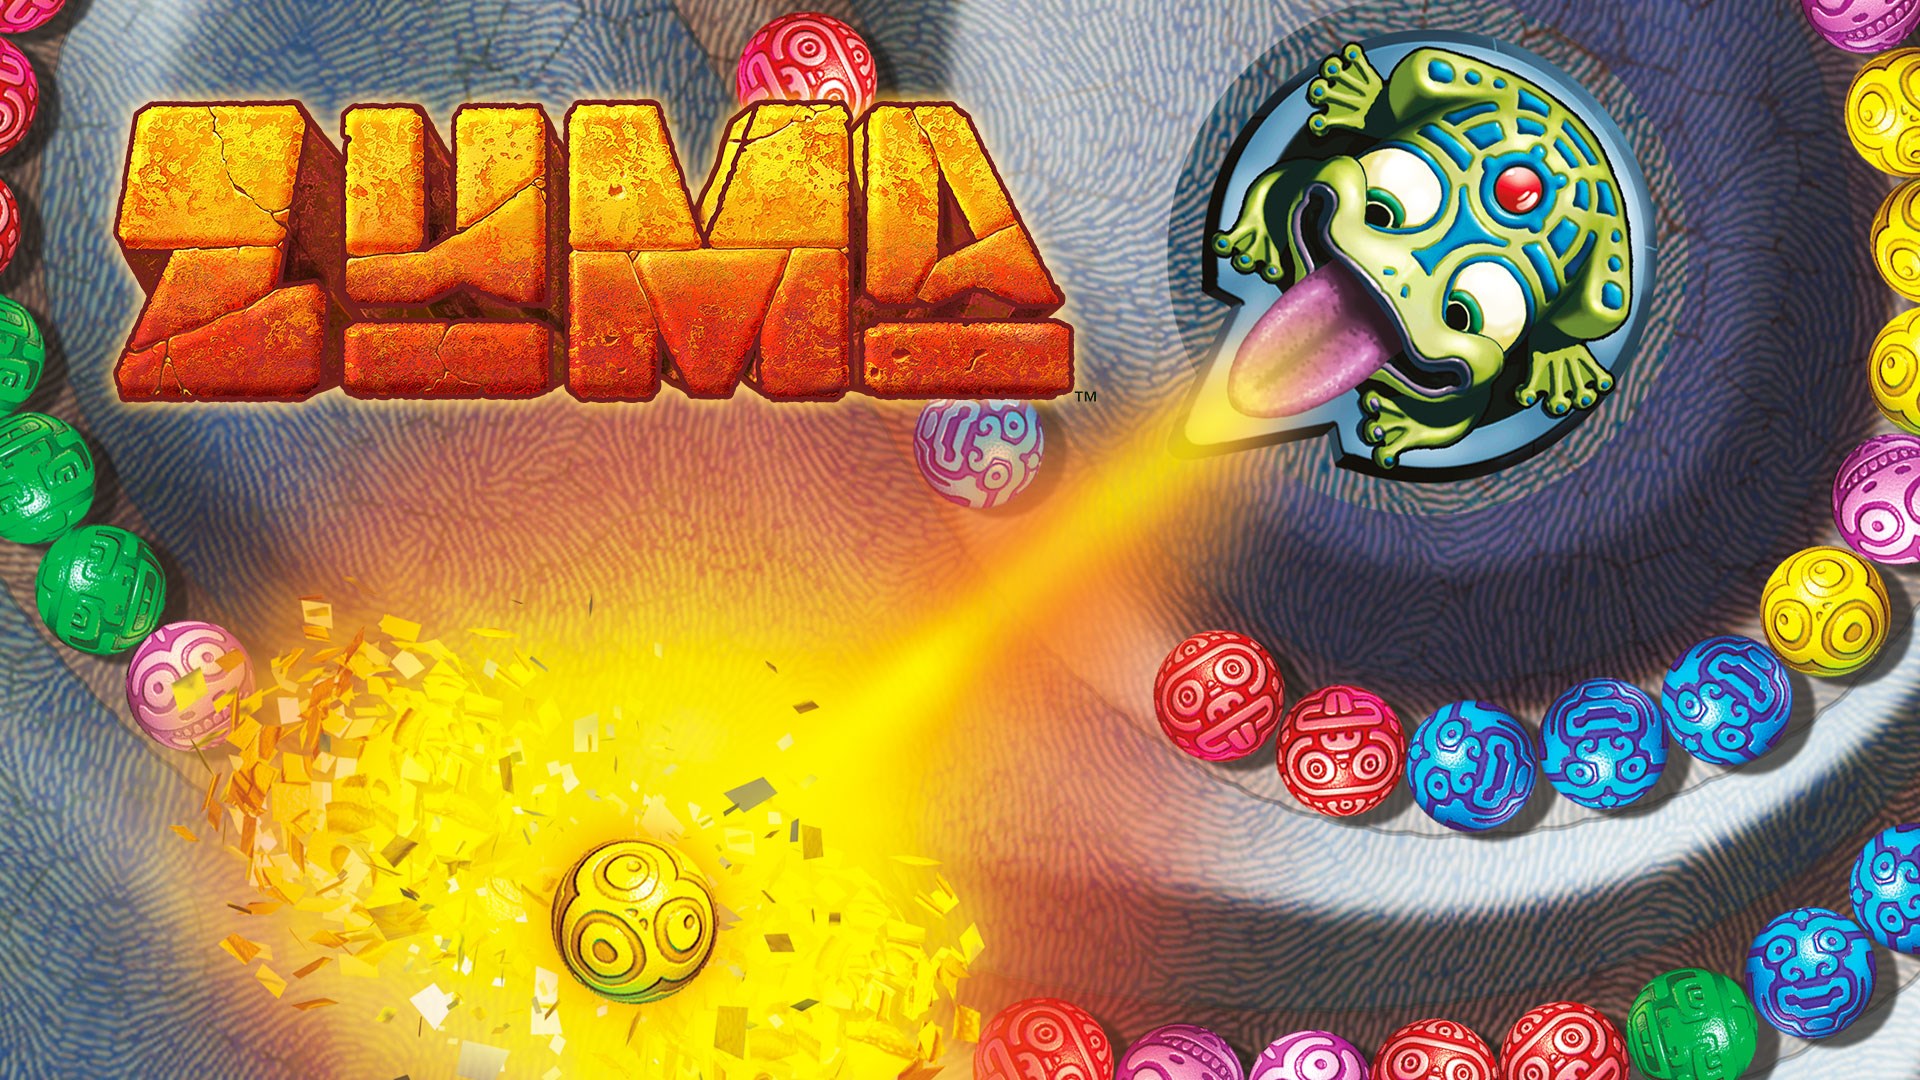 Zuma deluxe game download